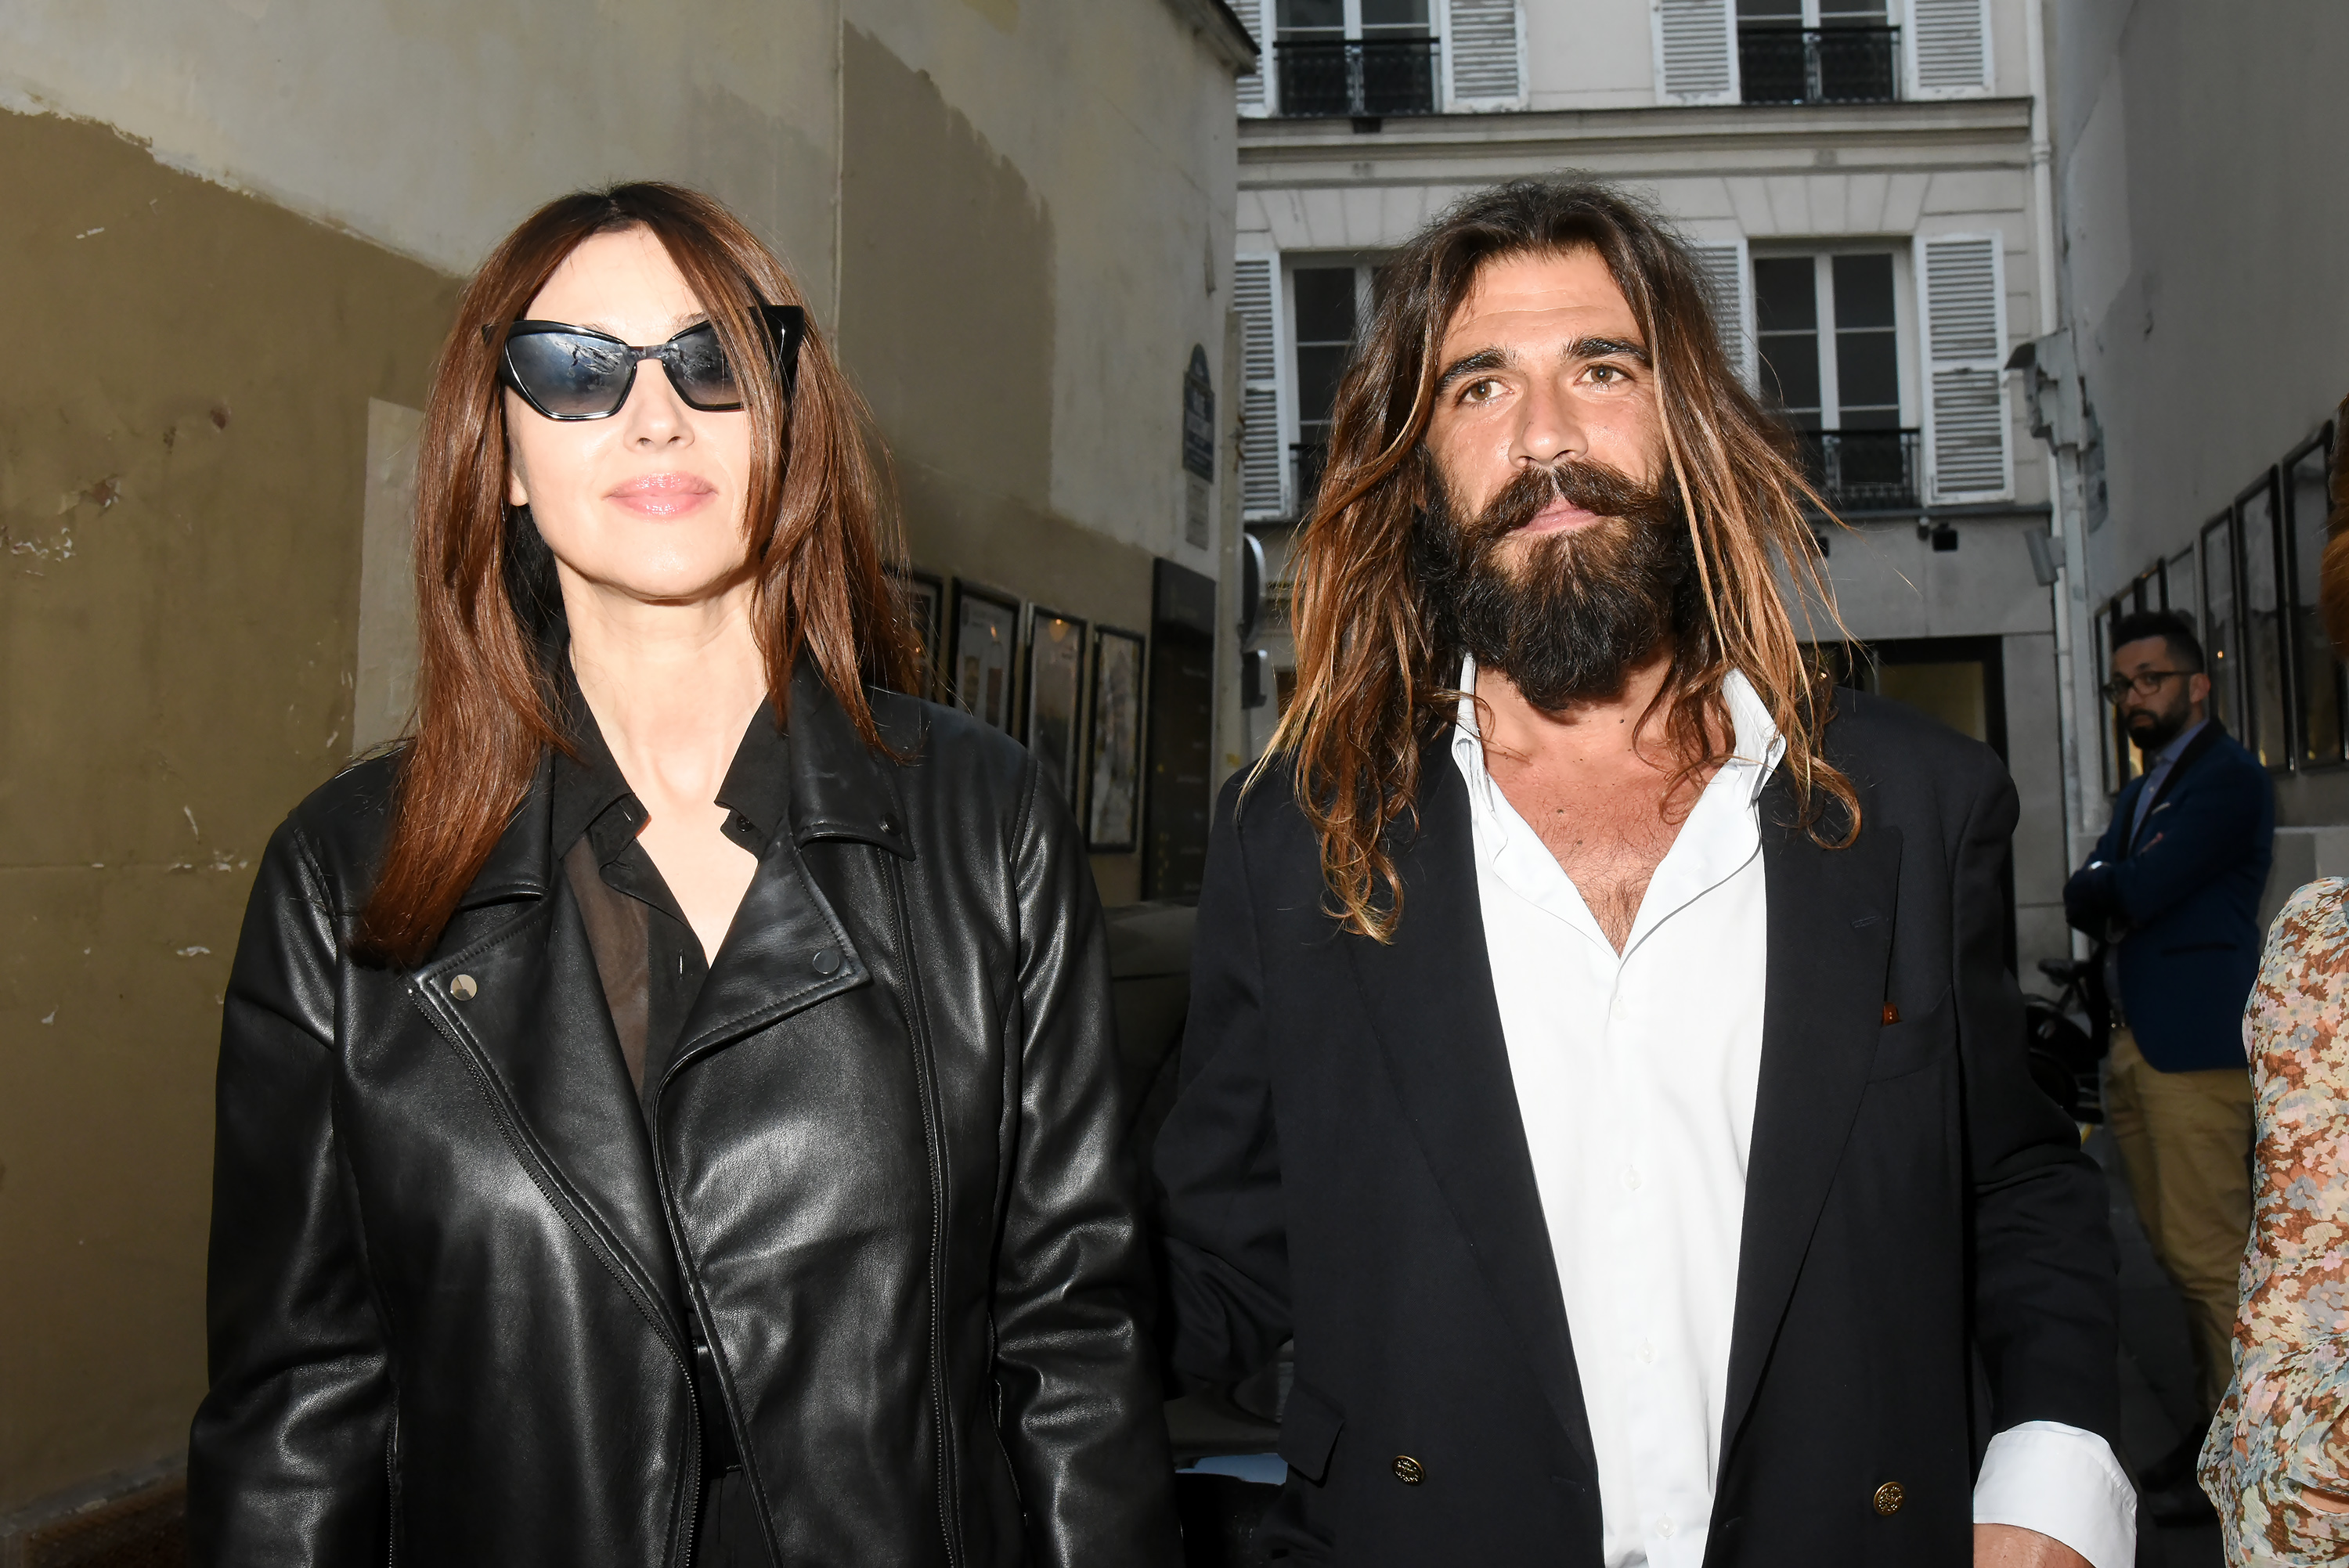 Nicolas Lefebvre and Monica Bellucci are pictured at the "Curiosites" Rose de Ganay exhibition Preview at 4 rue de Visconti on June 6, 2019, in Paris, France | Source: Getty Images